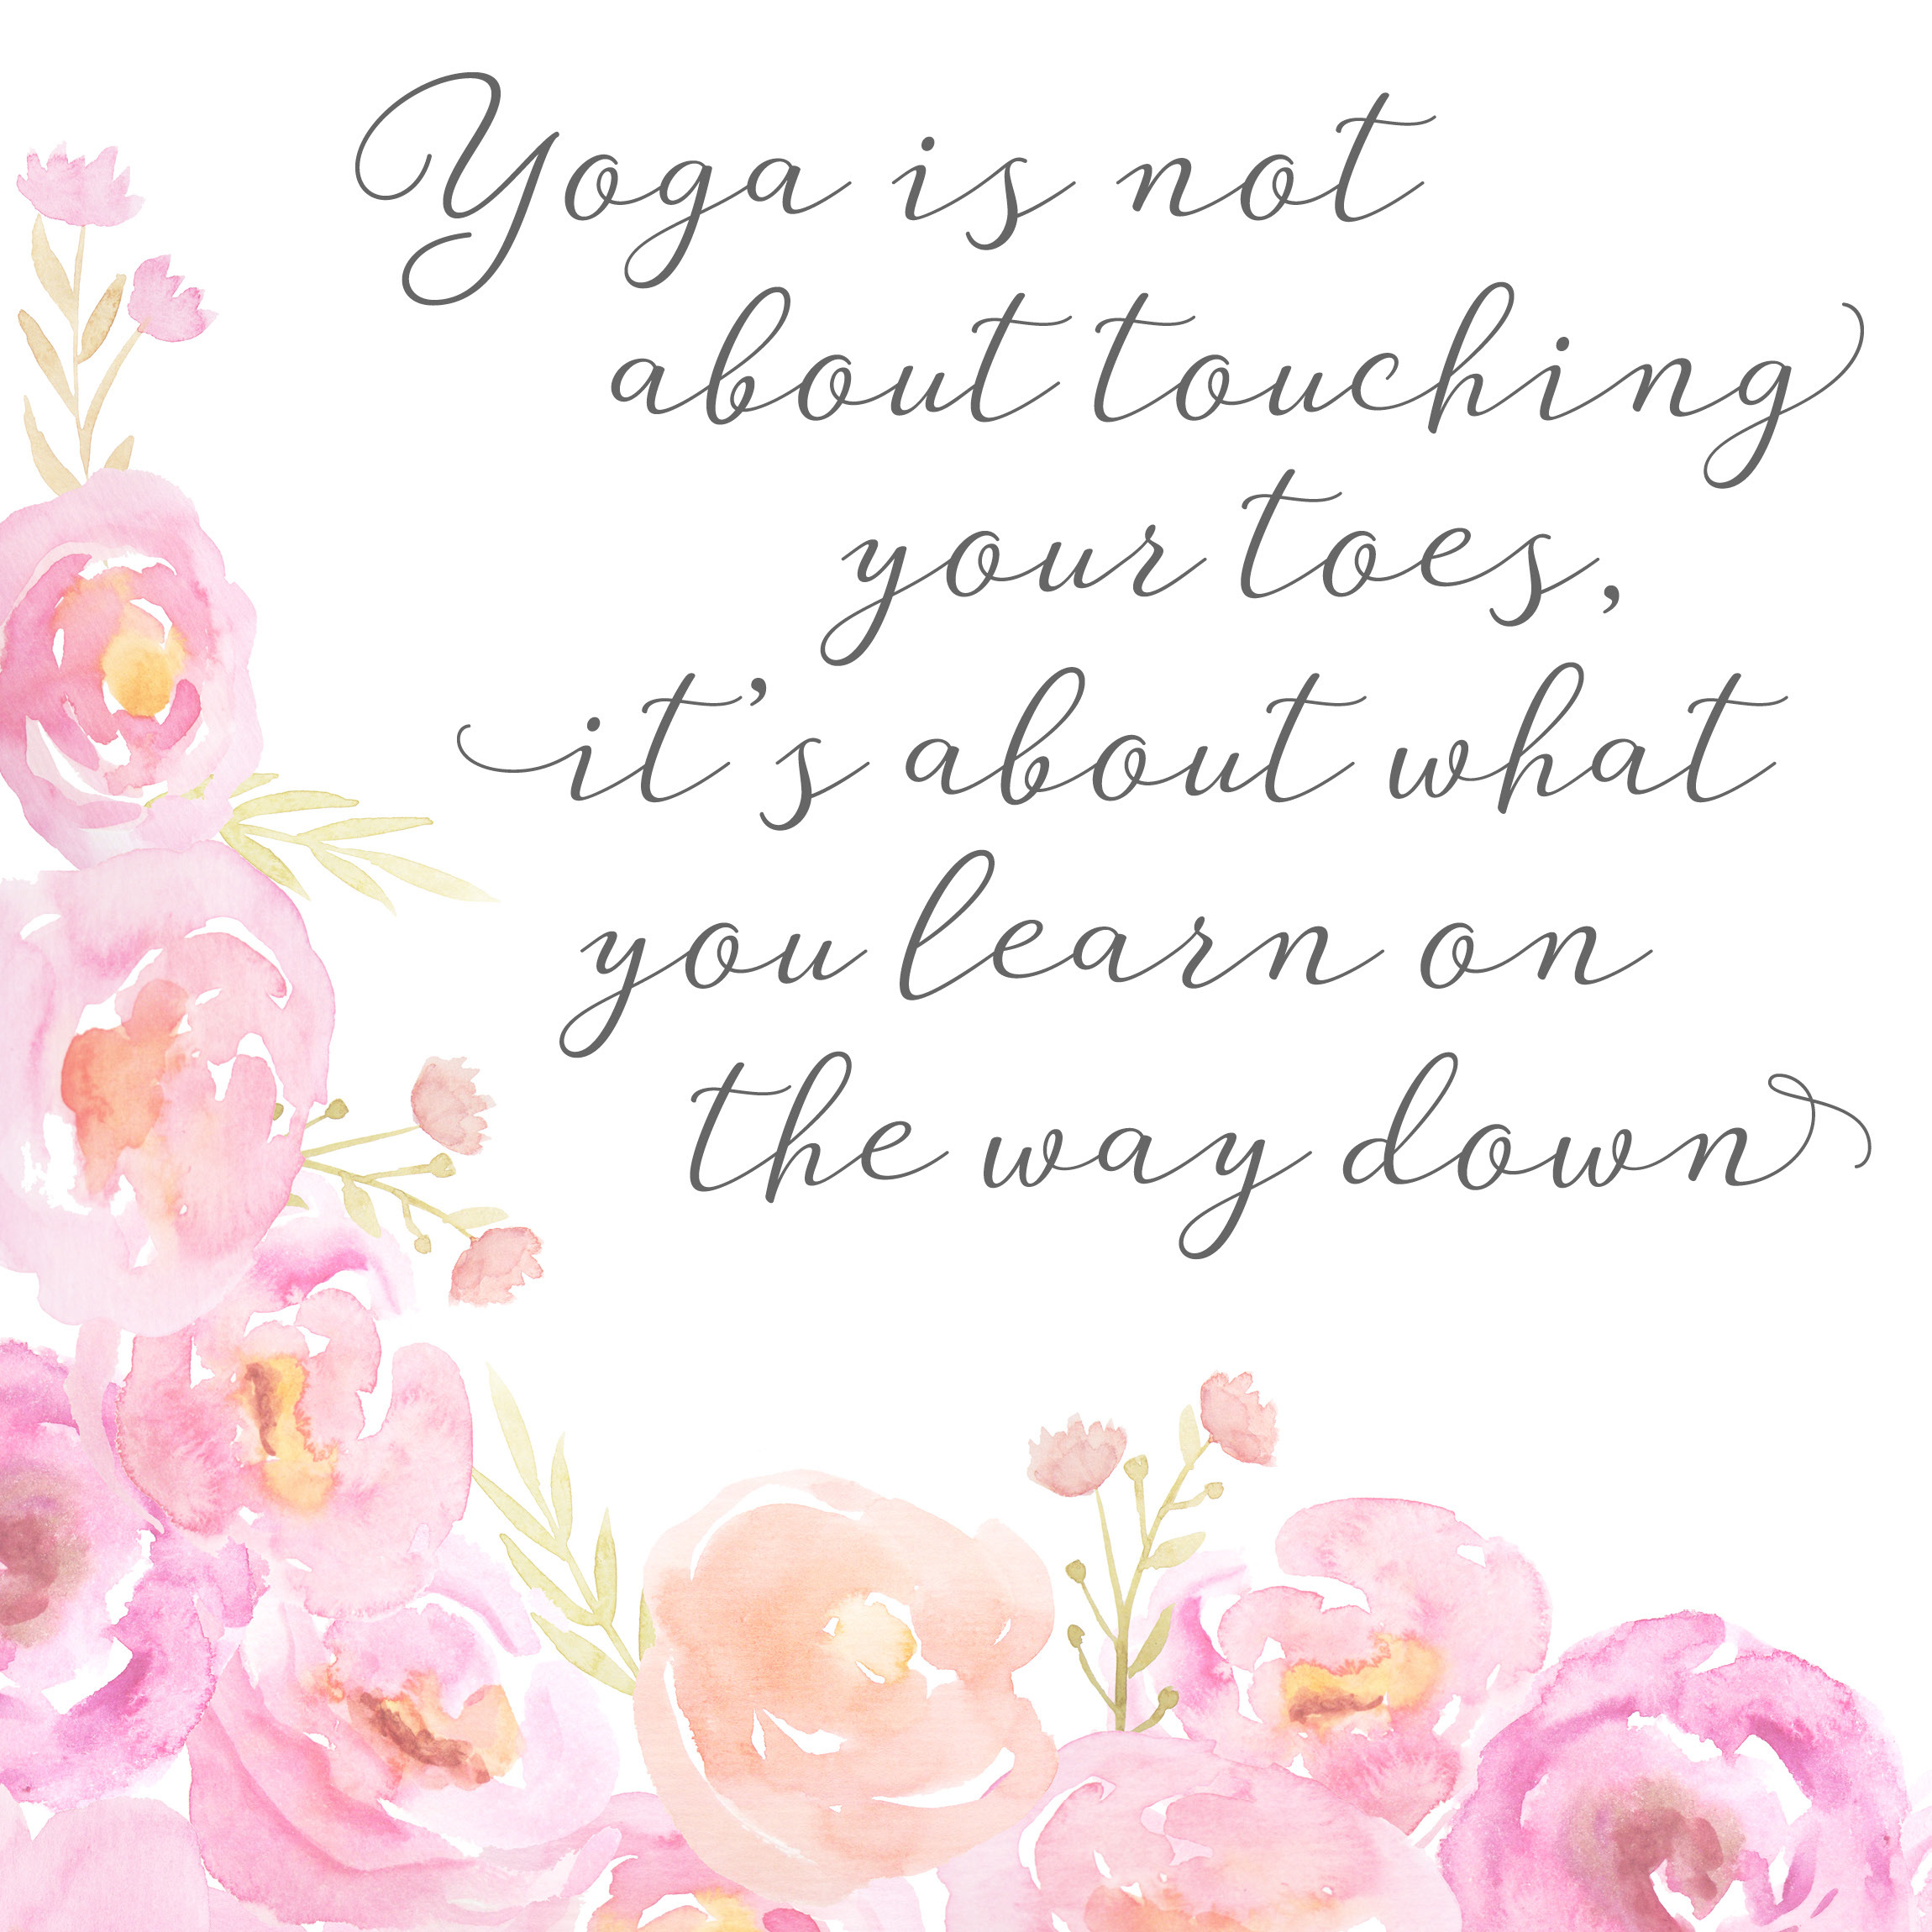 Yoga is not about touching your toes, it's about what you learn on the way down.